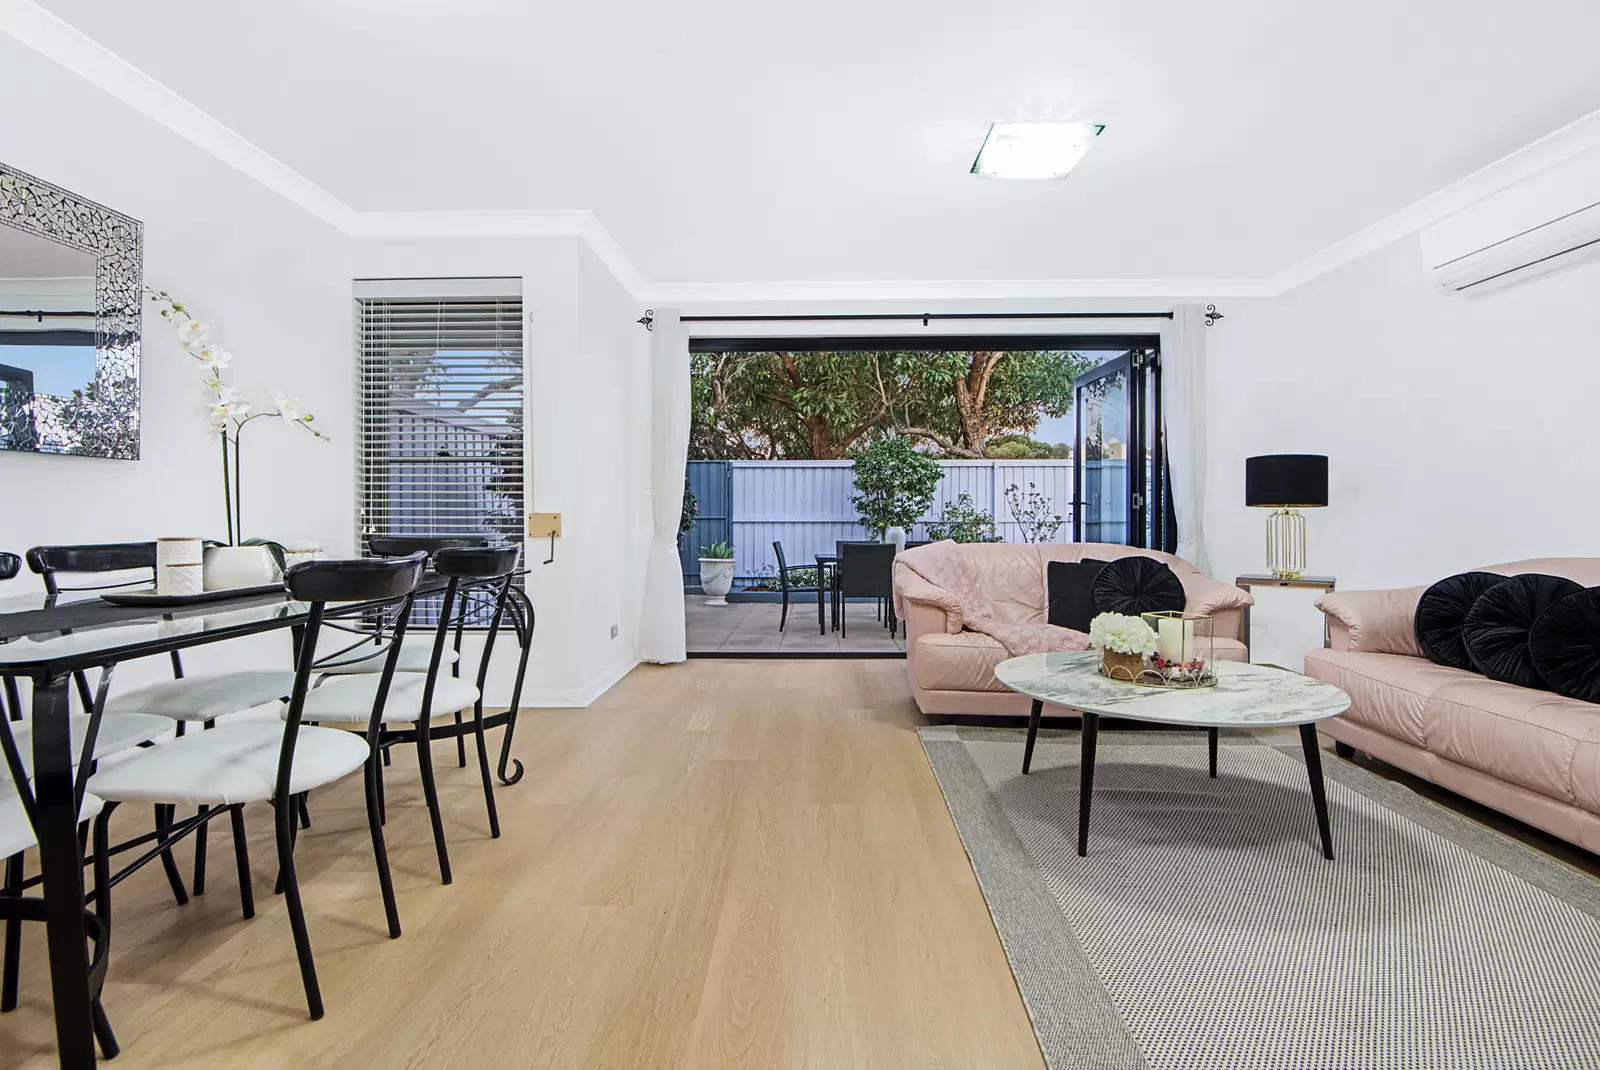 16/5 Wride Street, Maroubra For Sale by Sydney Sotheby's International Realty - image 6